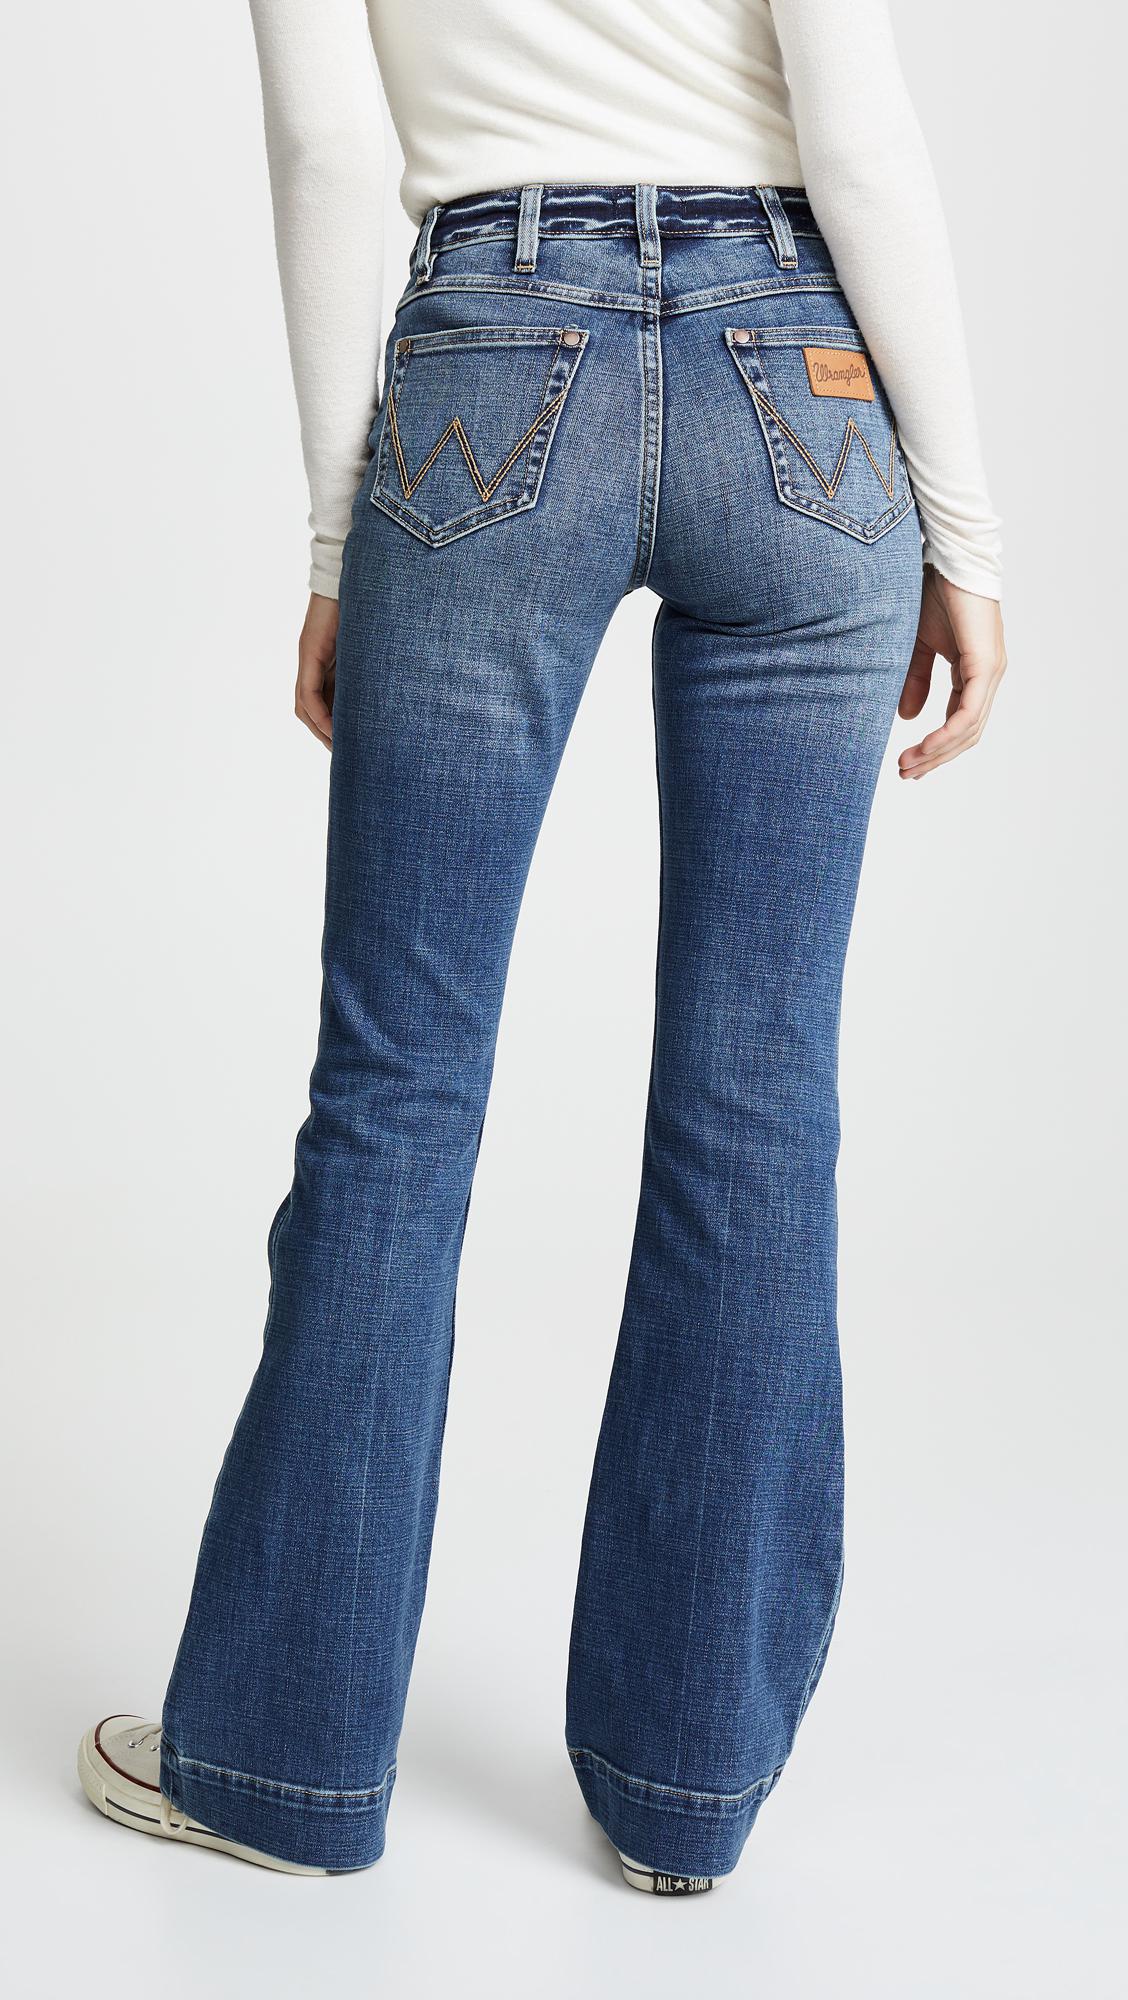 Wrangler Denim Exaggerated Bootcut Jeans in Blue - Lyst